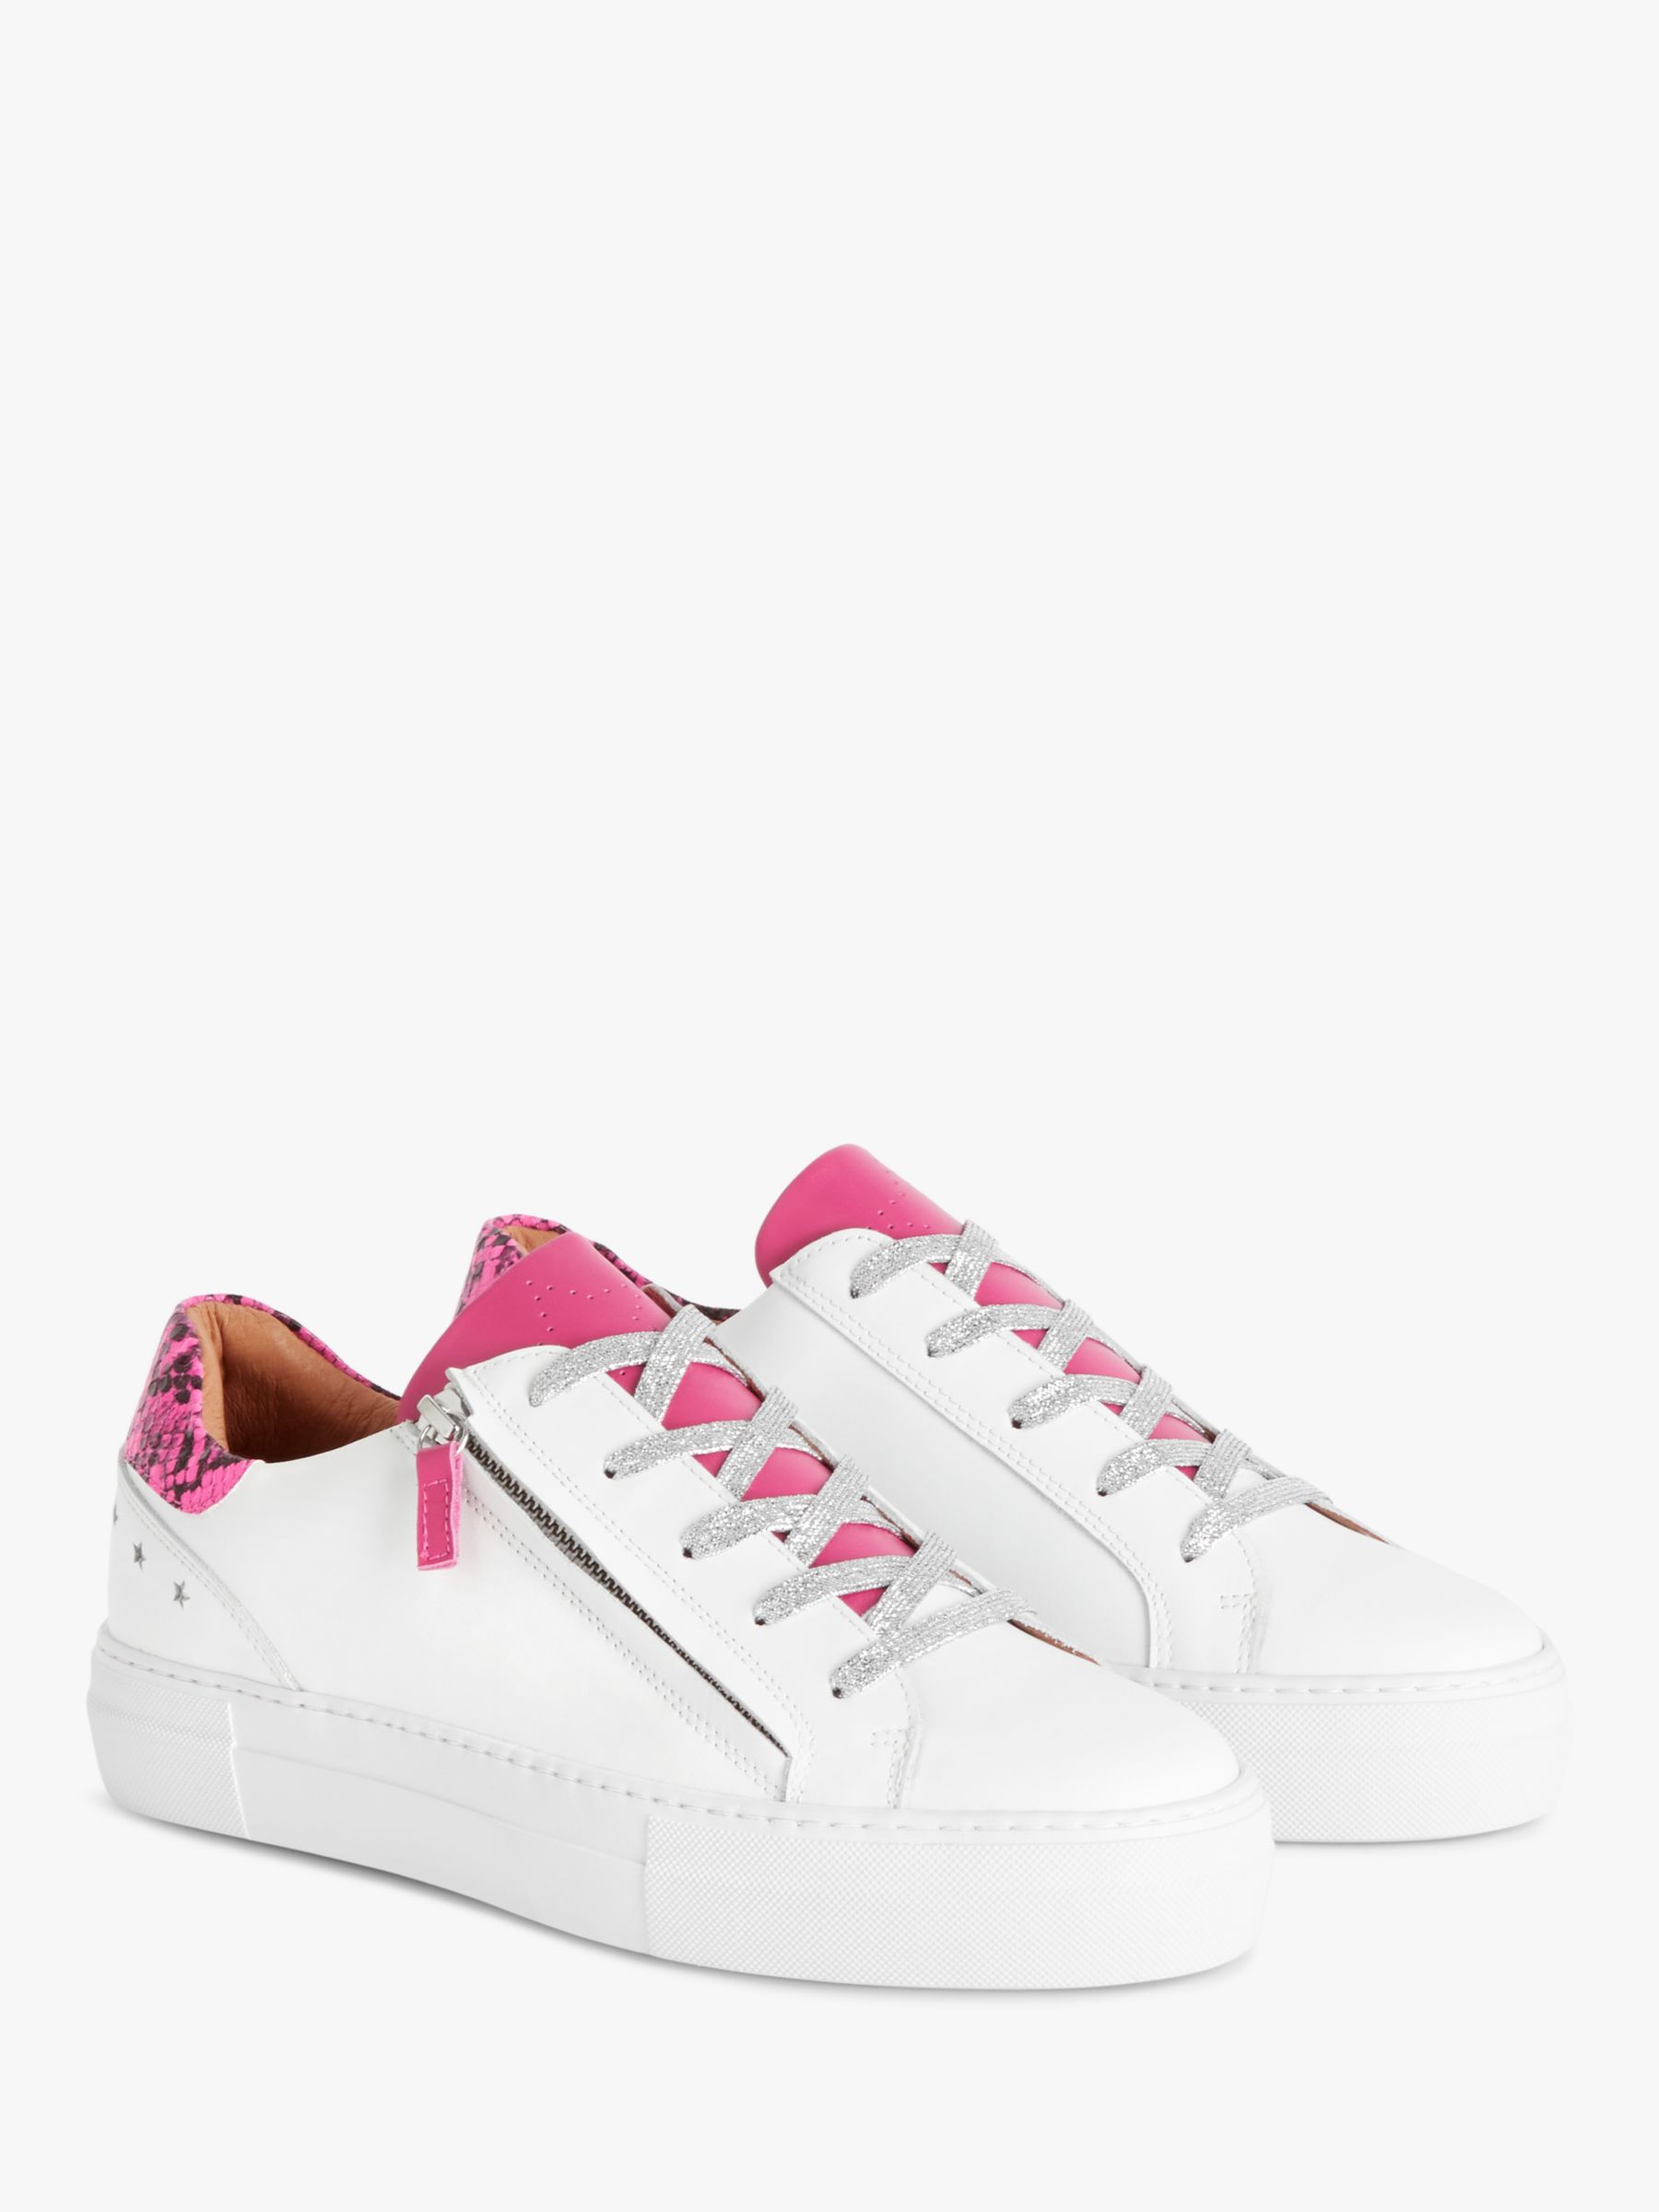 AND/OR Edun Leather Zip Cupsole Trainers